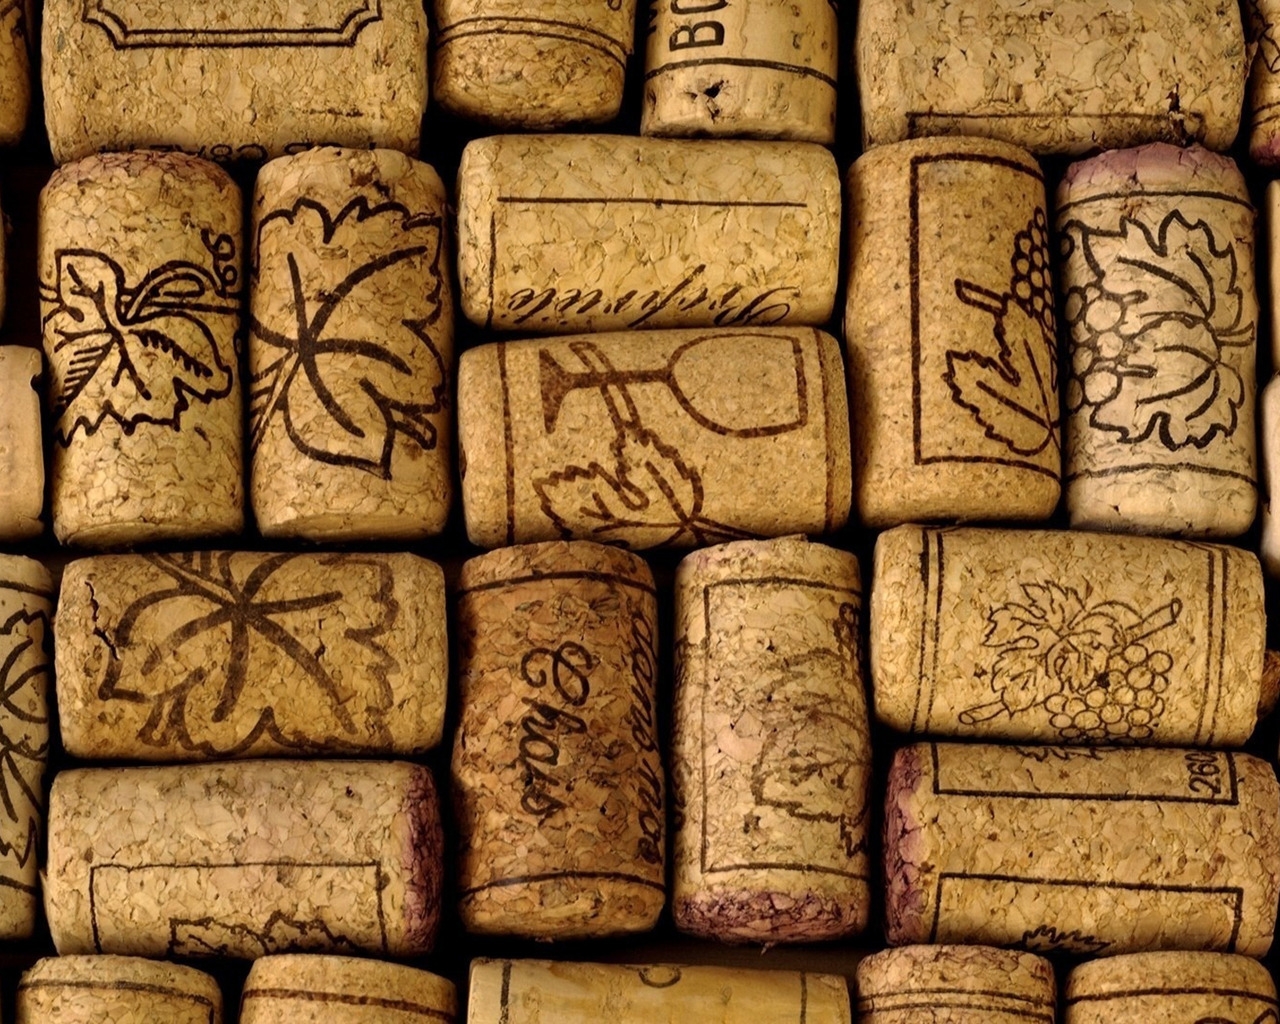 Corks for 1280 x 1024 resolution